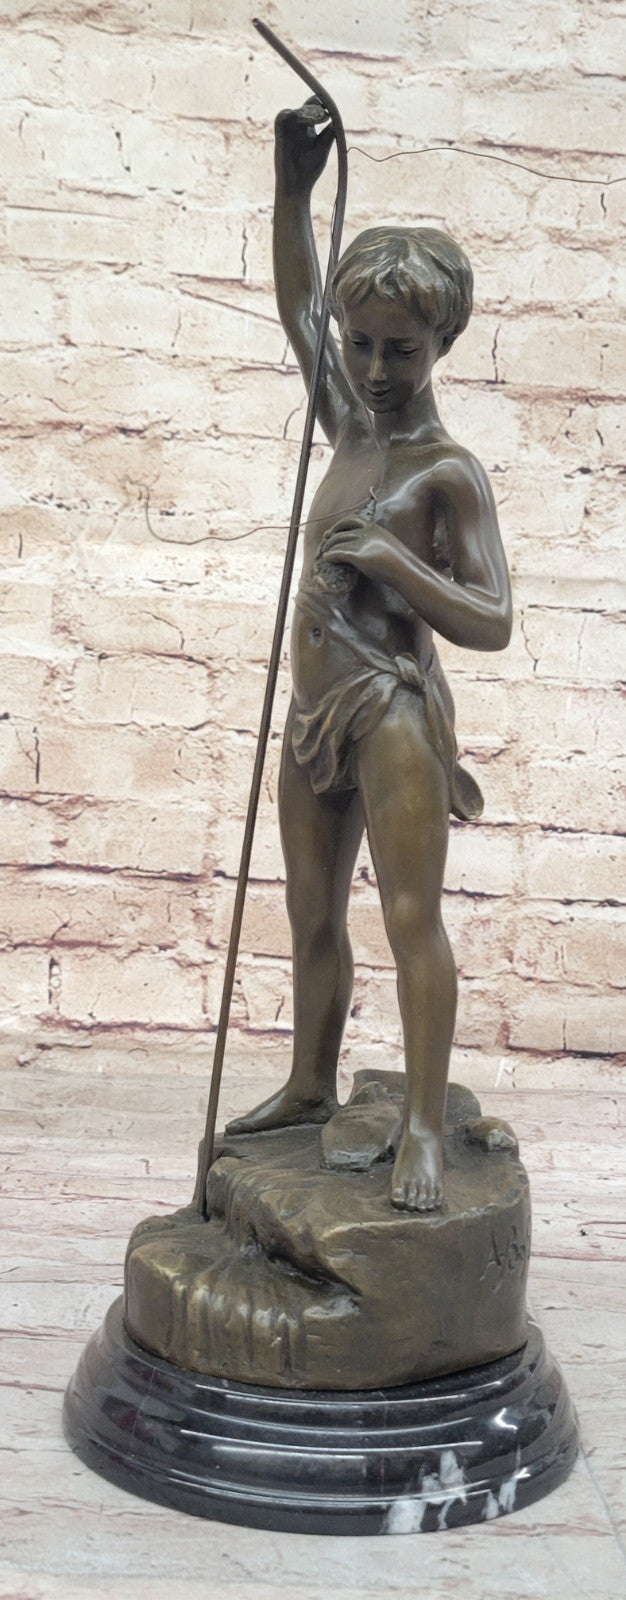 Museum Quality Fishing Boy Bronze Statue - A.Bofill Handcrafted Art